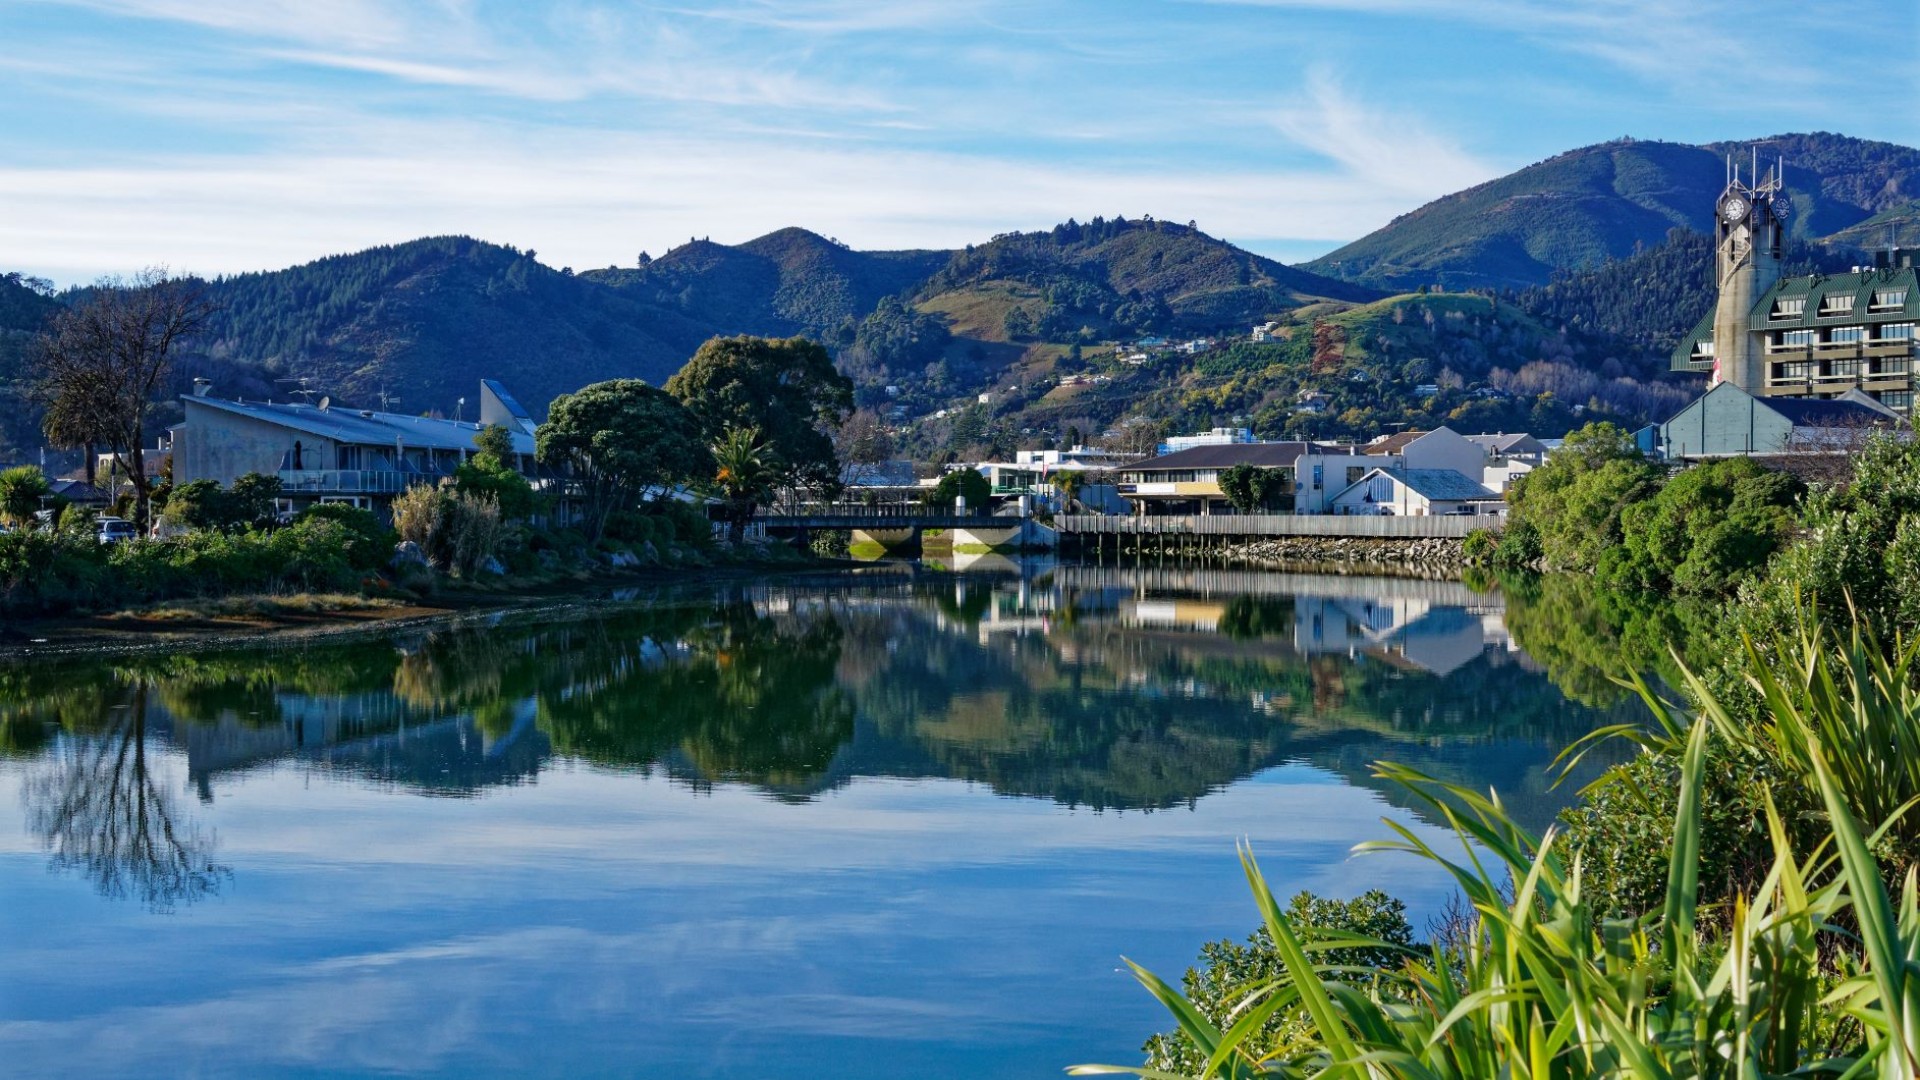 Springtime In Nelson - Beaches, Lakes And Mountains